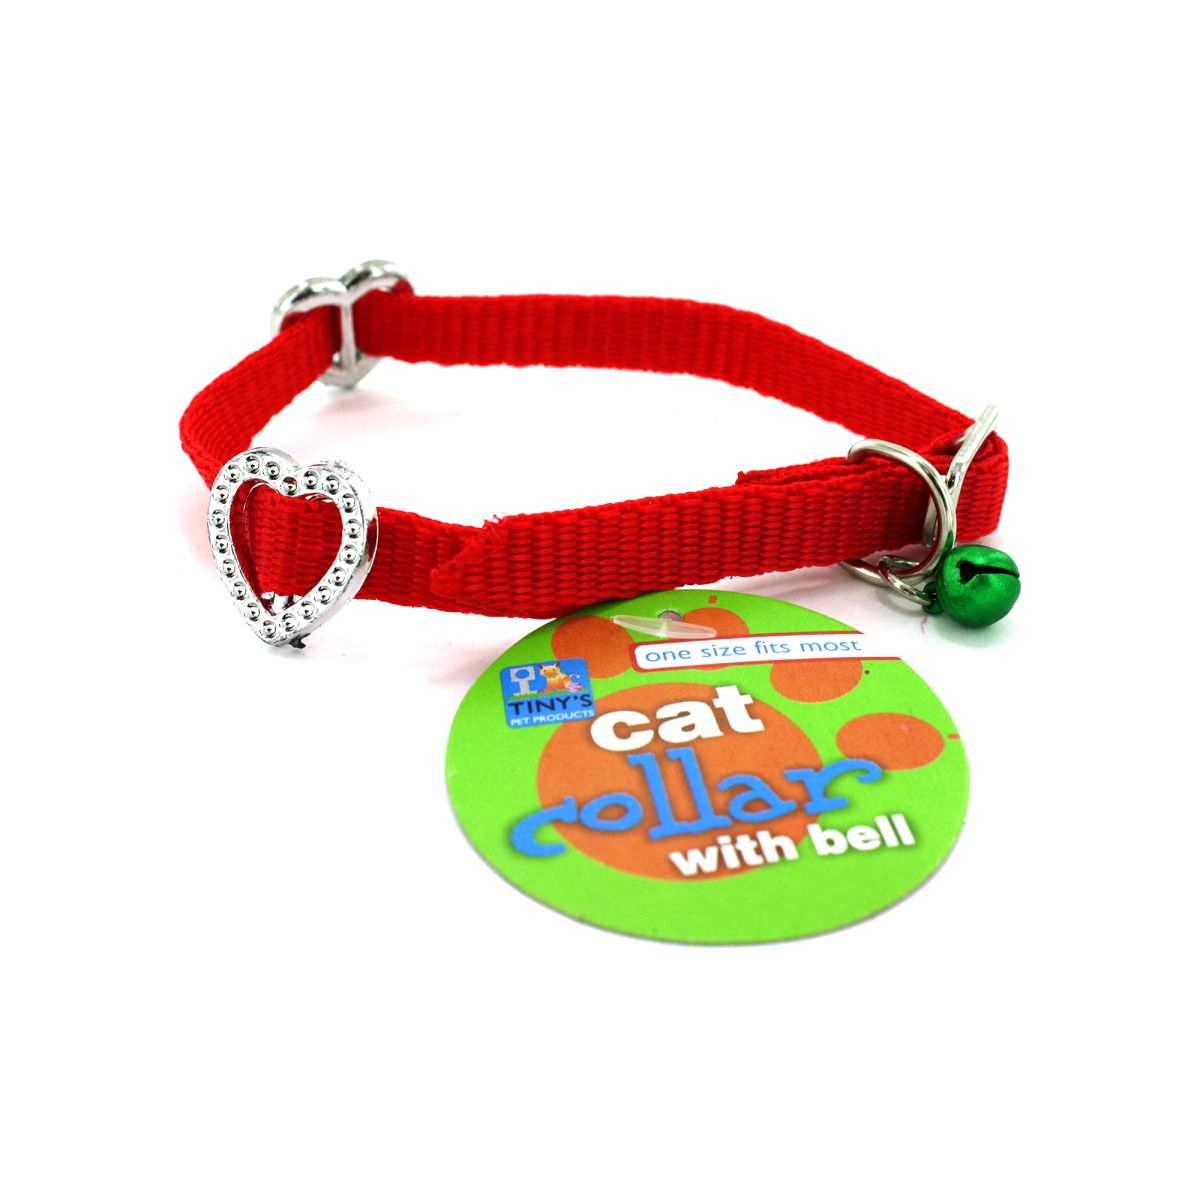   144 Adjustable Cat Kitty Bell Collars Hearts Assorted Colors